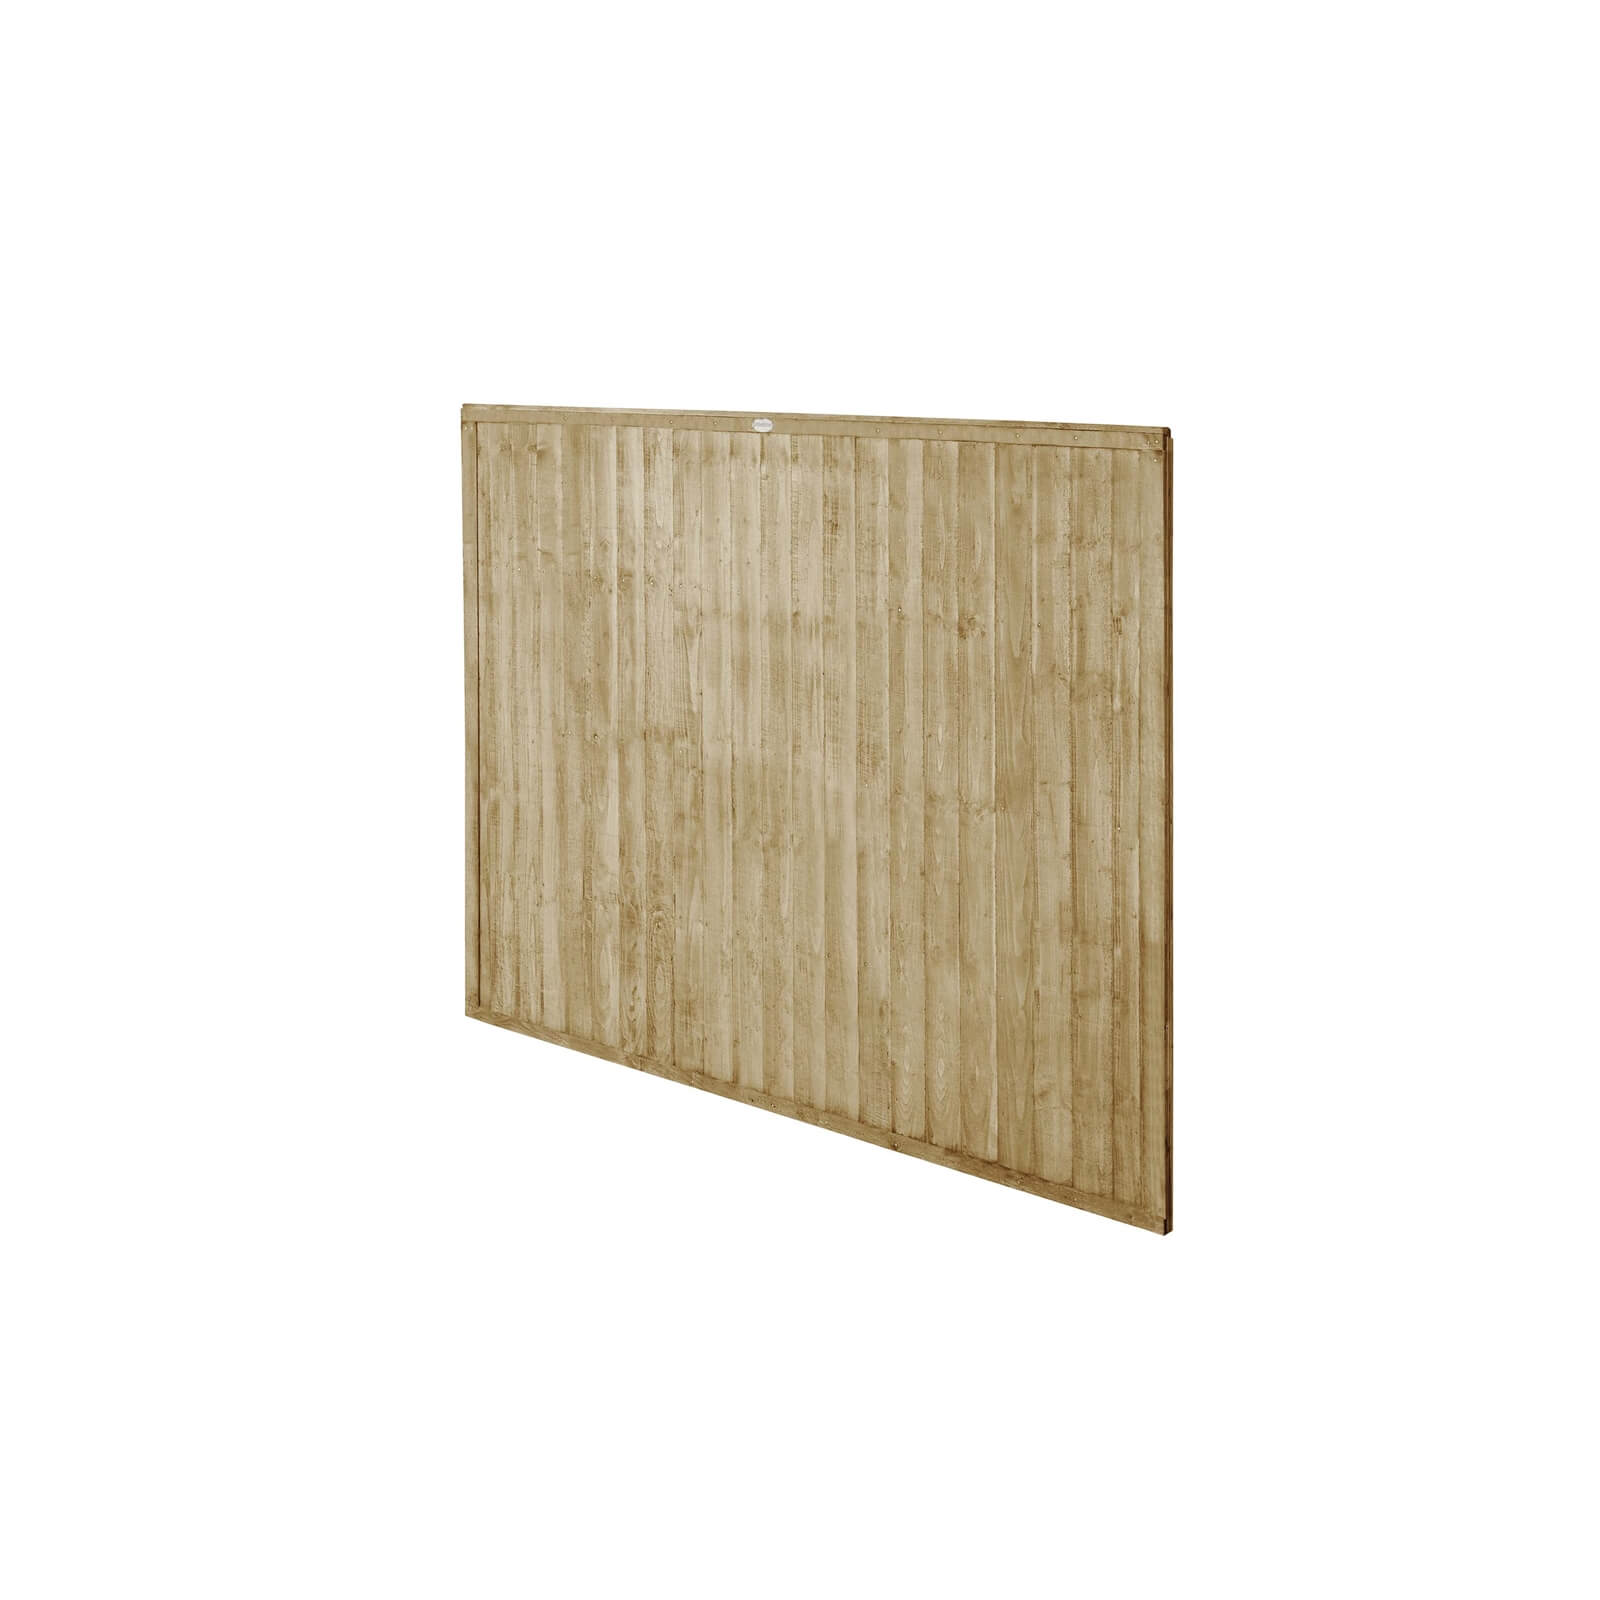 6ft x 5ft (1.83m x 1.52m) Pressure Treated Closeboard Fence Panel - Pack of 4